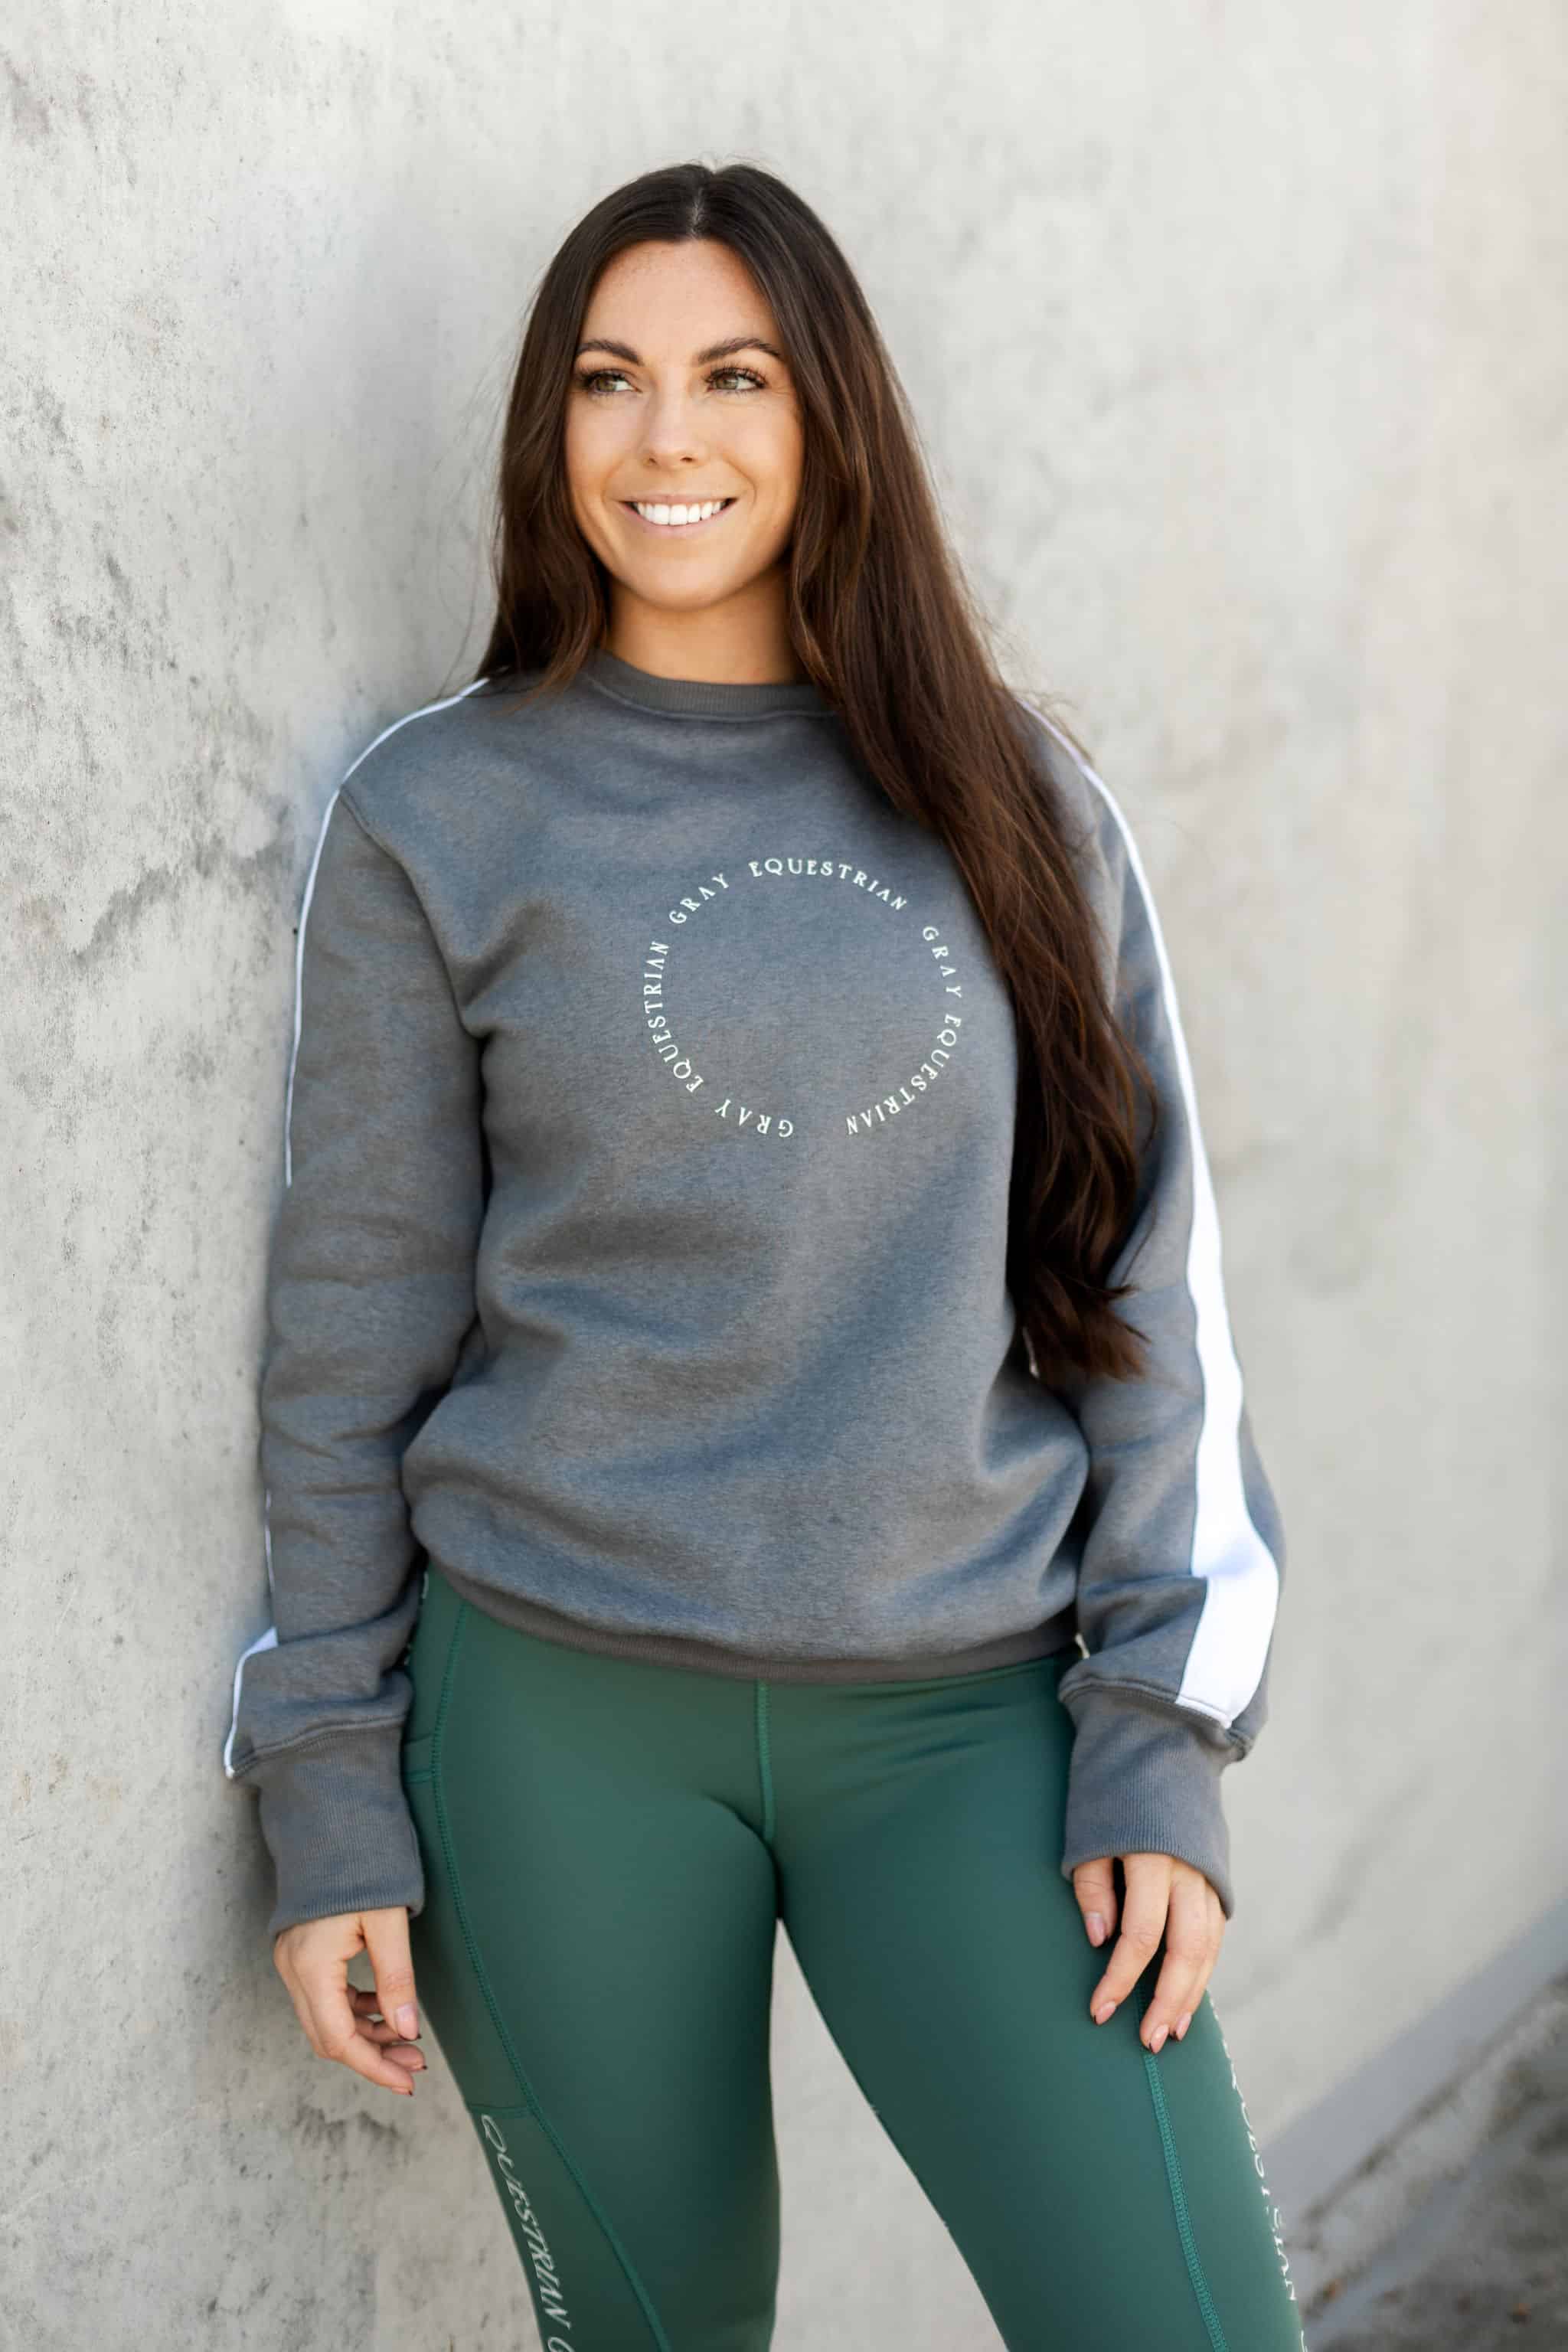 A model wearing our grey sweatshirt with white paneling down the sleeves and minimalist Grey Equestrian branding. The model is also wearing our green riding leggings.